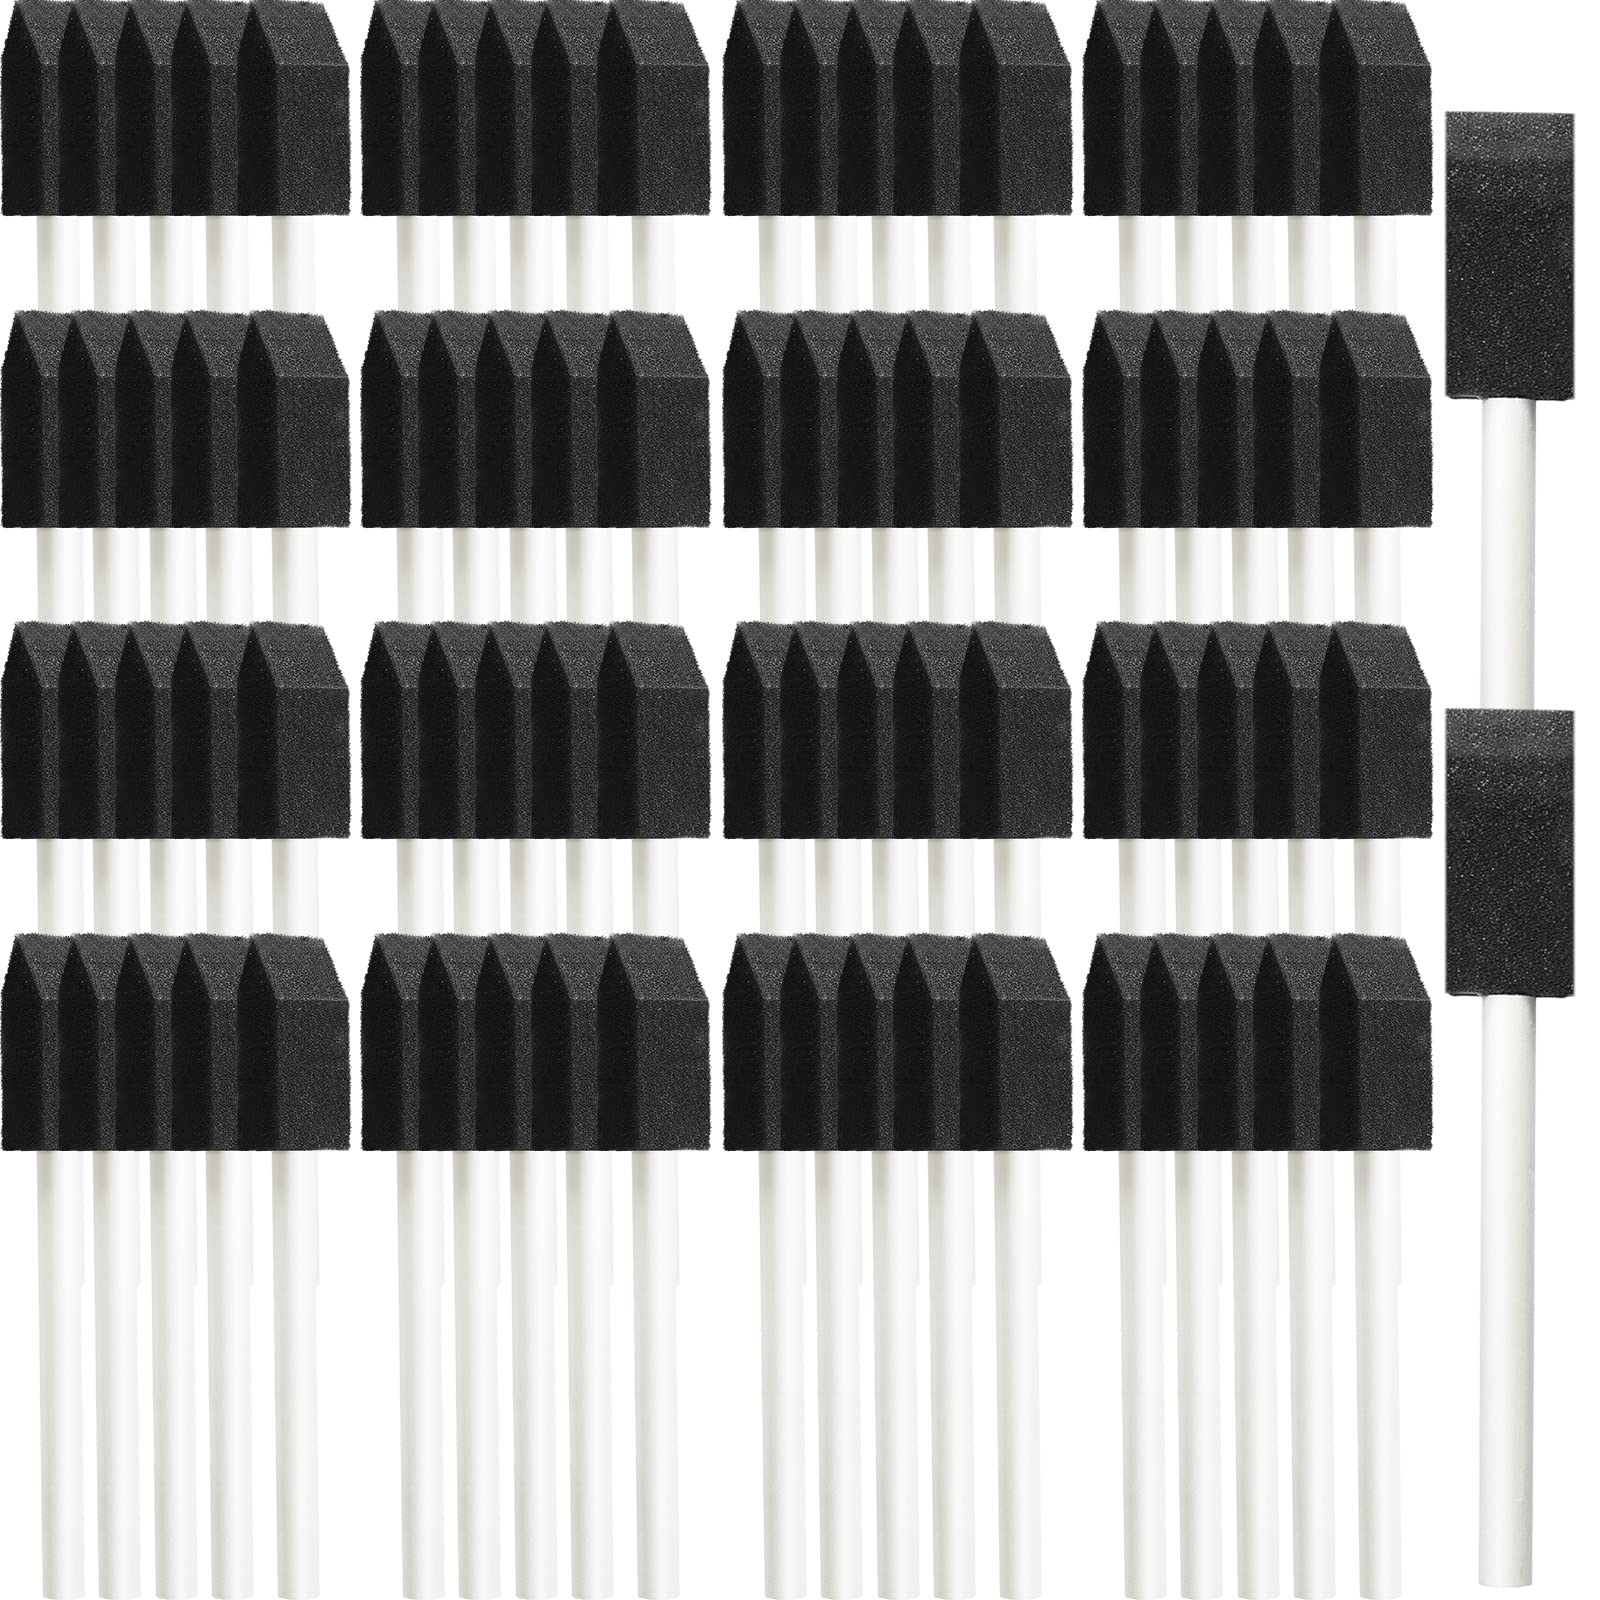 200 Pack Foam Brush Bulk Foam Paint Brushes Sponge Black Foam Brushes for  Painting 1 Inch with Handle Wood Grip Foam Art Paintbrushes for Paint  Crafts Art Acrylics Stains